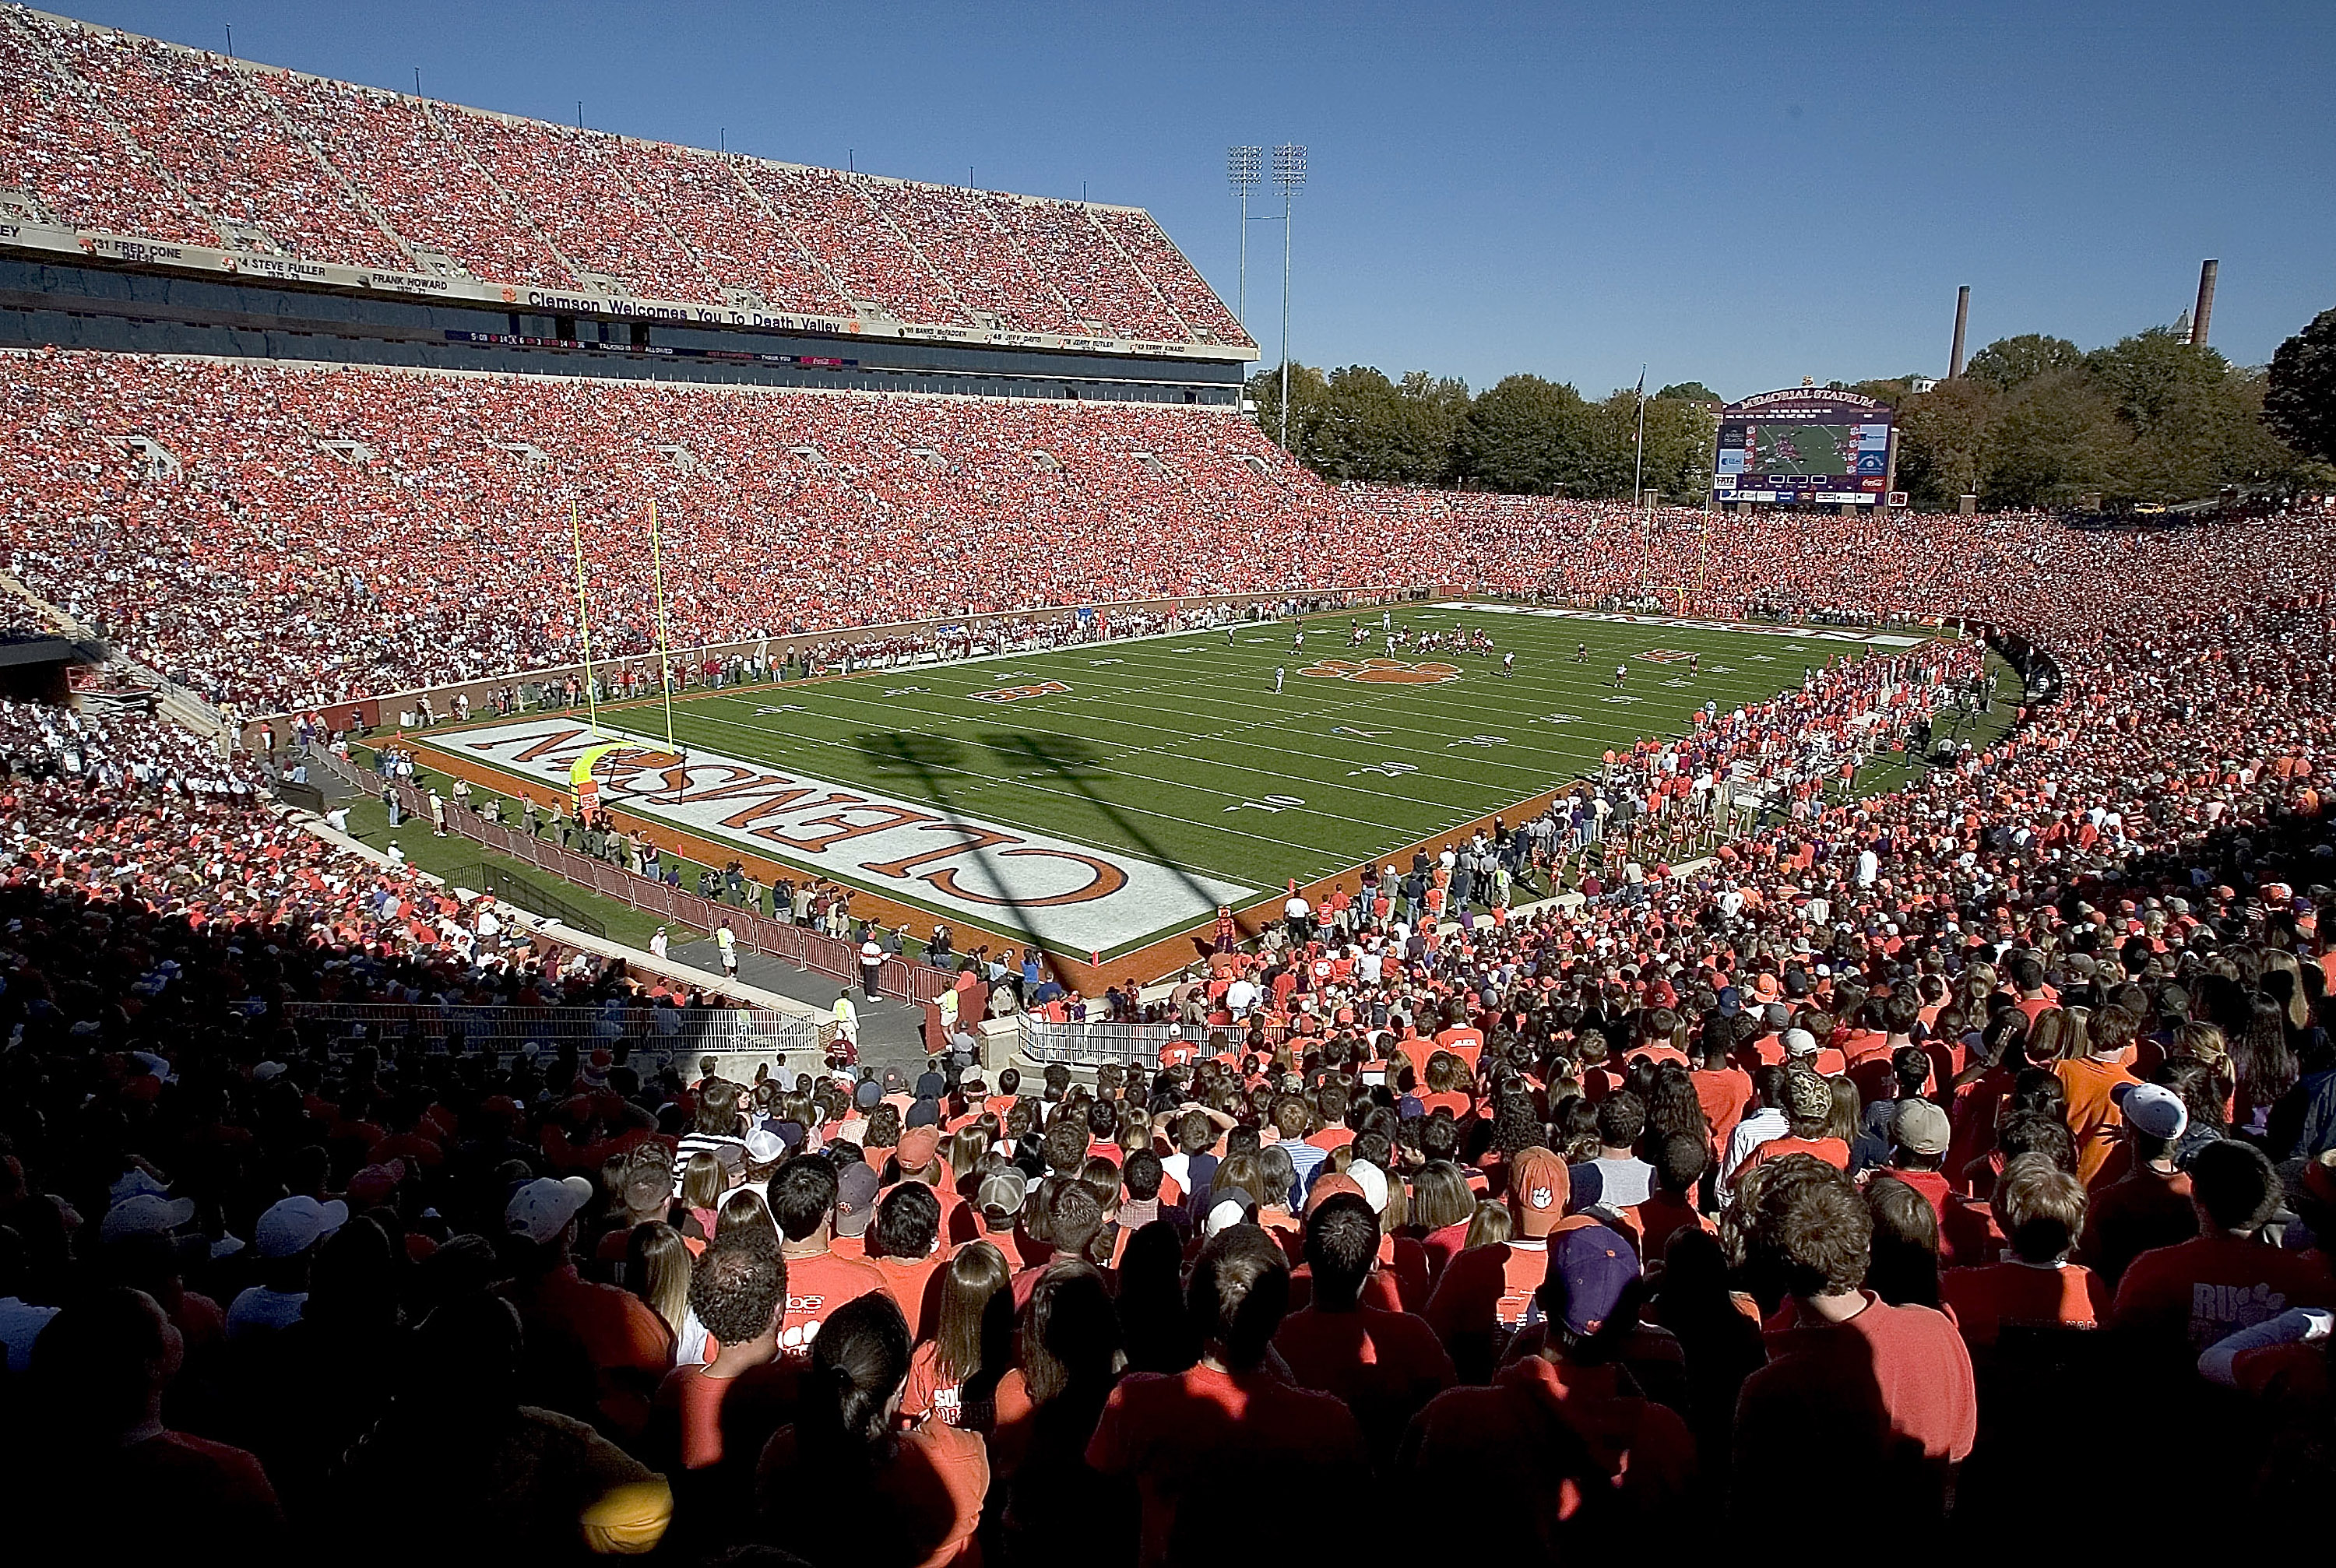 CLEMSON, SC - NOVEMBER 12:  Fans fill 'Death Valley' to watch a game between the Clemson Tigers and the Florida State Seminoles on November 12, 2005 at Clemson Memorial Stadium in Clemson, South Carolina.  (Photo by Grant Halverson/Getty Images)